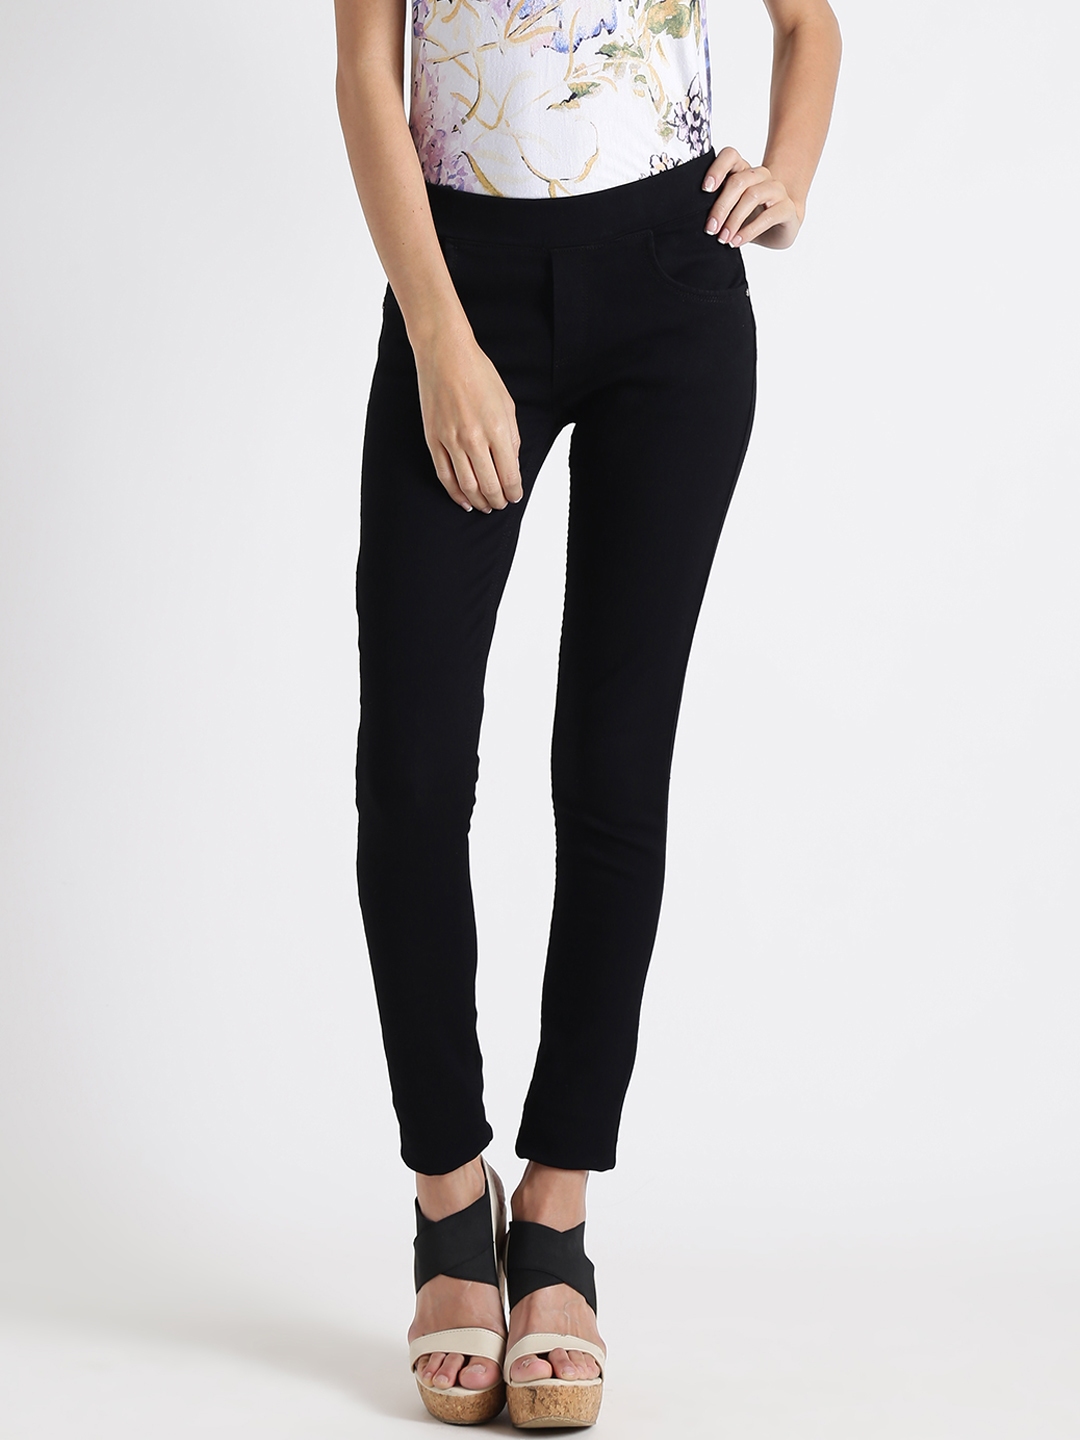 Fashion Forward: Hang N Hold's Chic Jacquard Ladies Jeggings, Slim Fit at  Rs 700 in Ludhiana